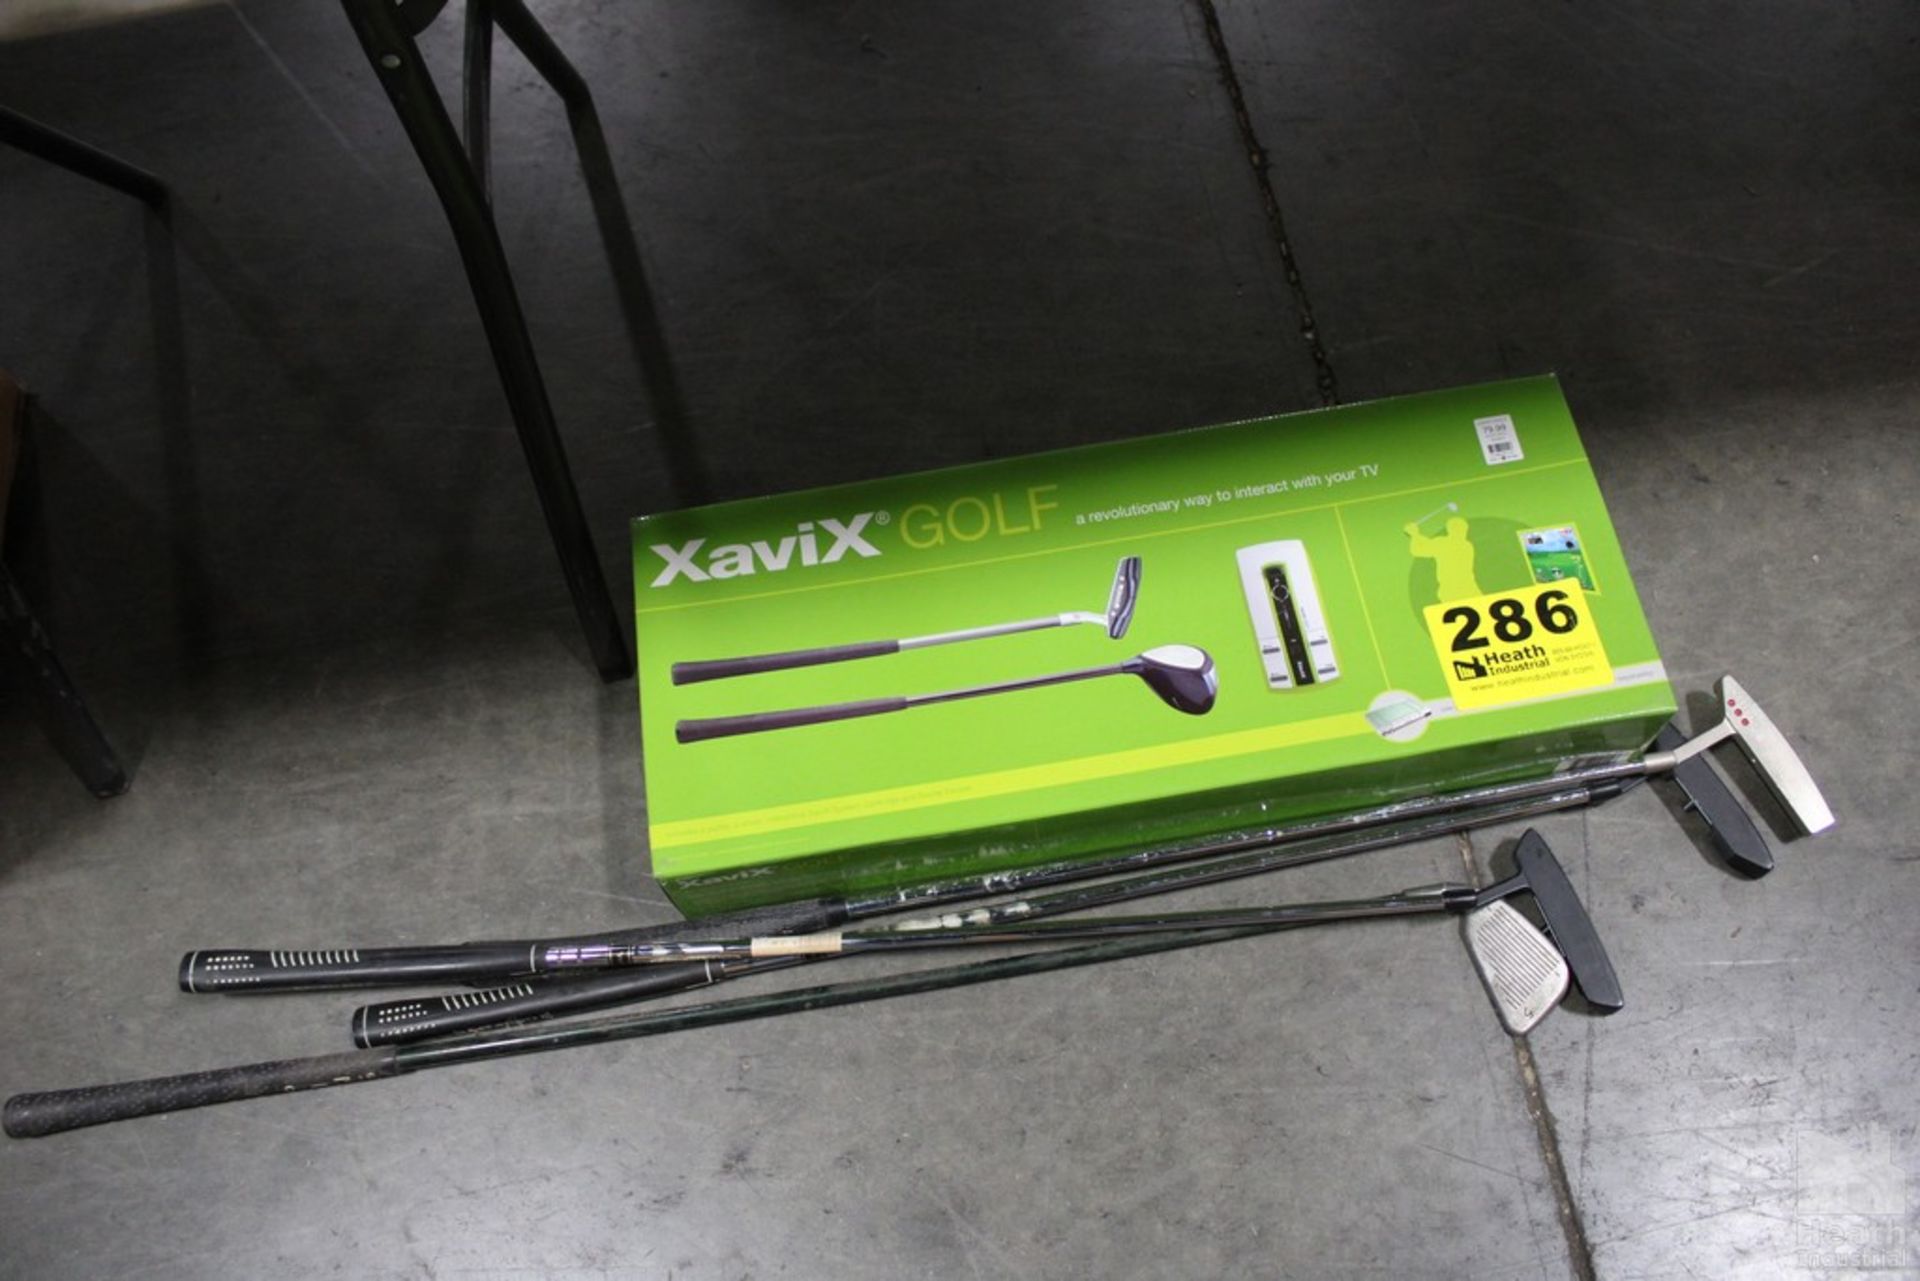 XAVIX TV INTERACTIVE GOLF KIT AND ASSORTED CLUBS